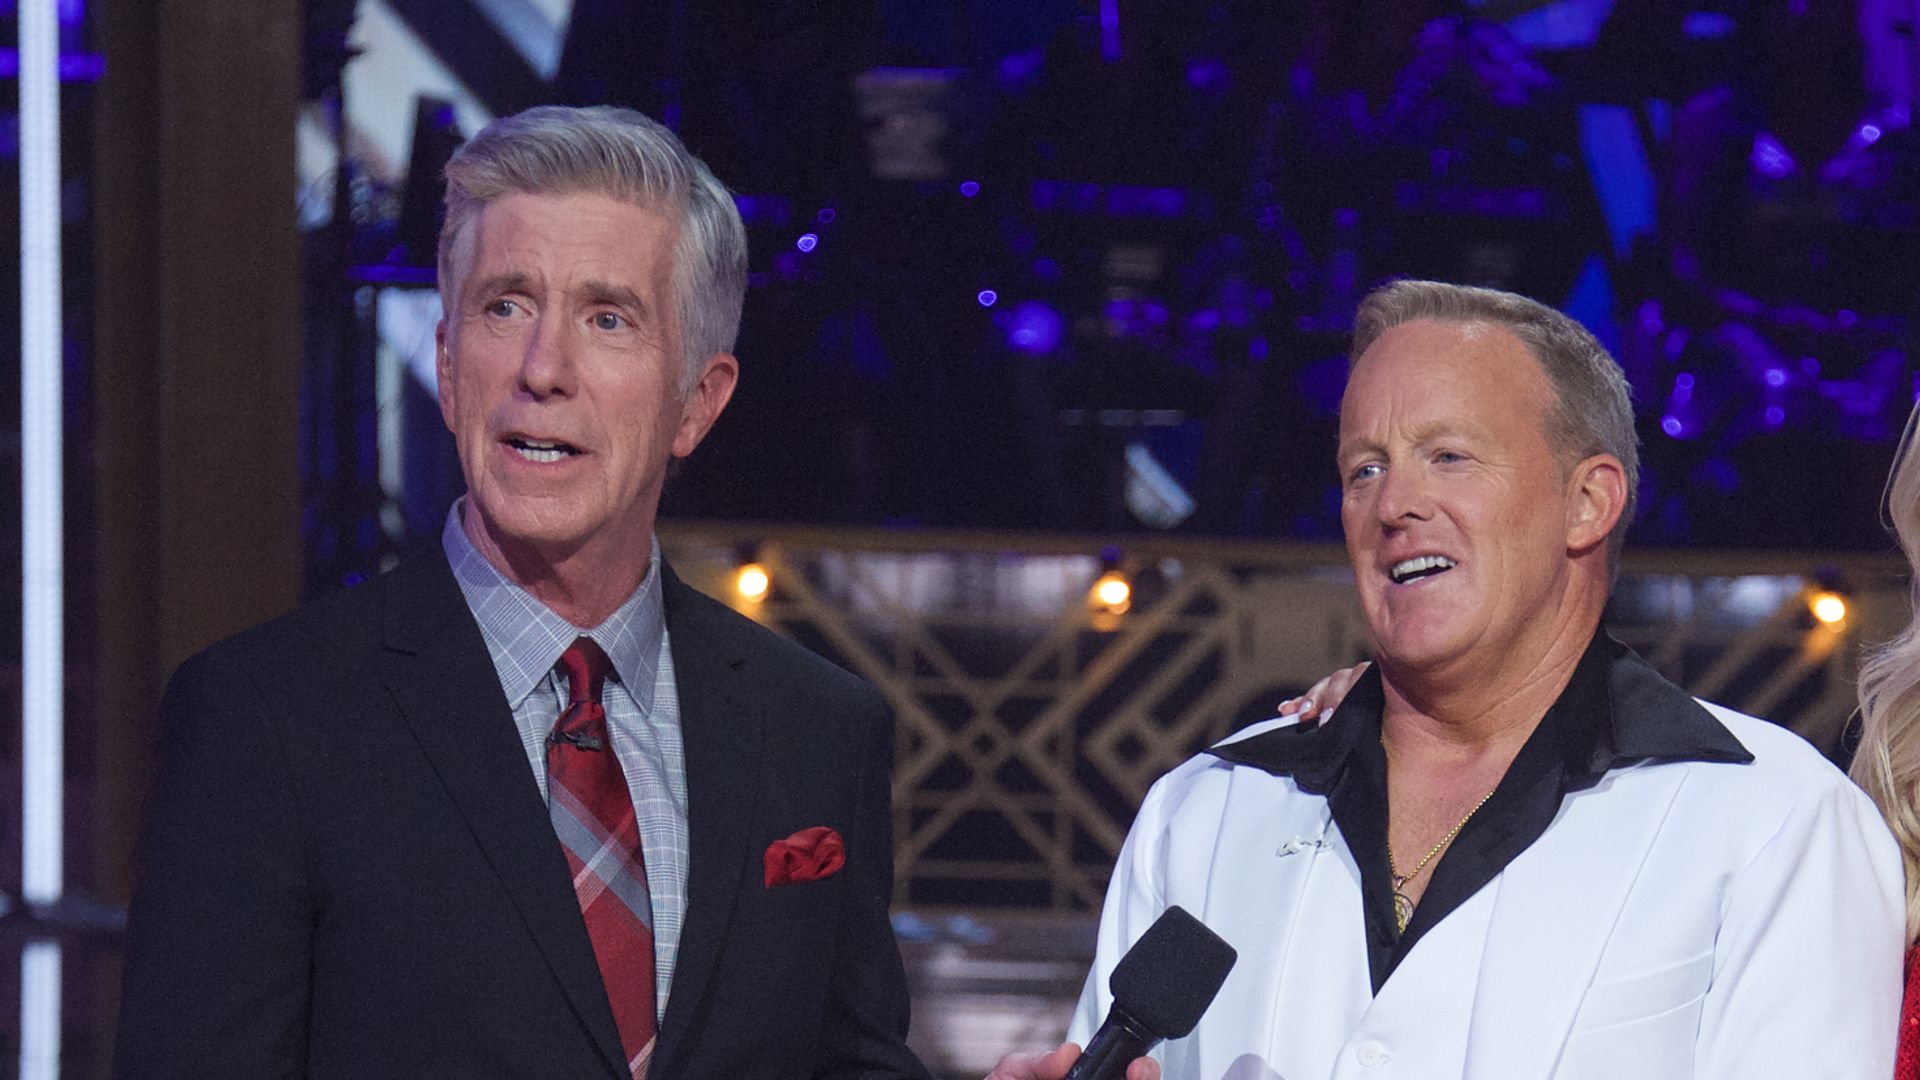 Tom Bergeron and Sean Spicer on season 32 of Dancing with the Stars in 2019